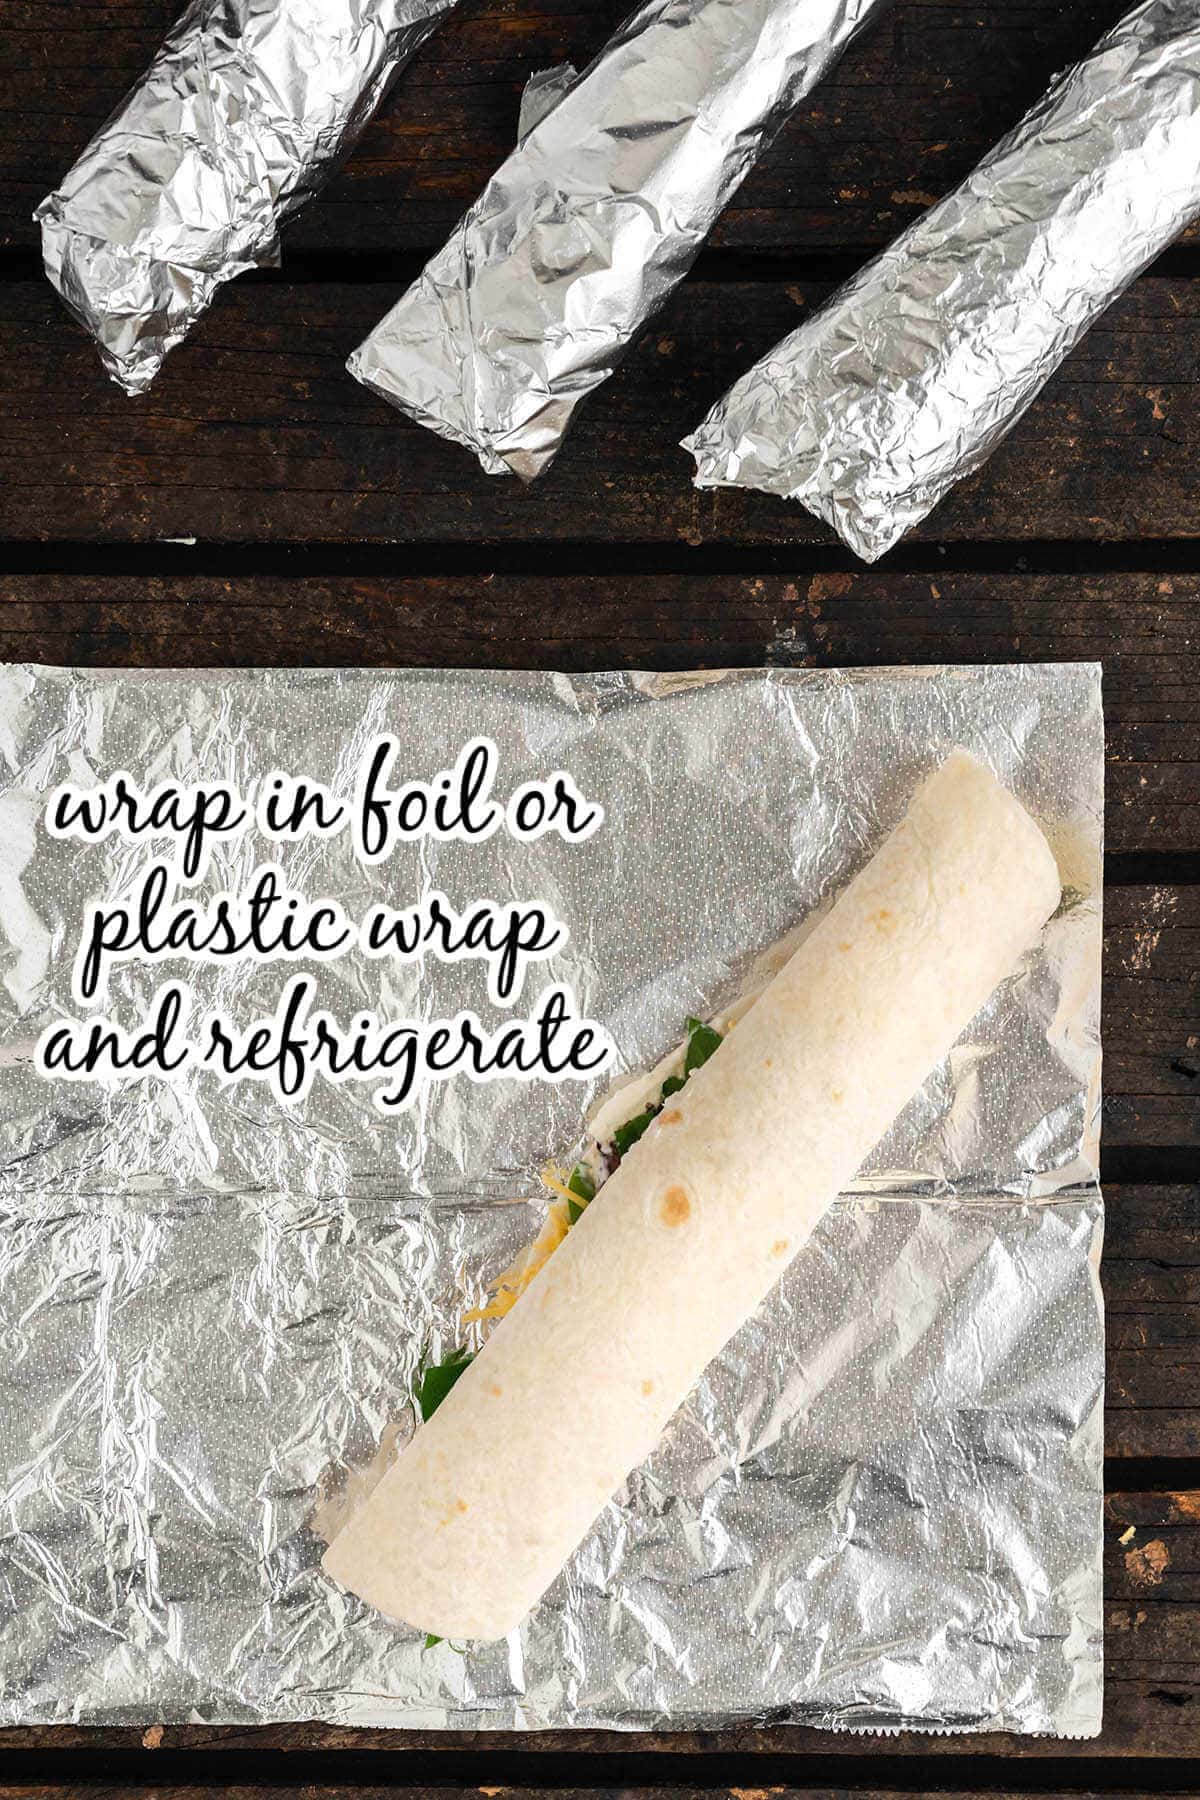 Tortilla rollup on aluminum foil. With print overlay.